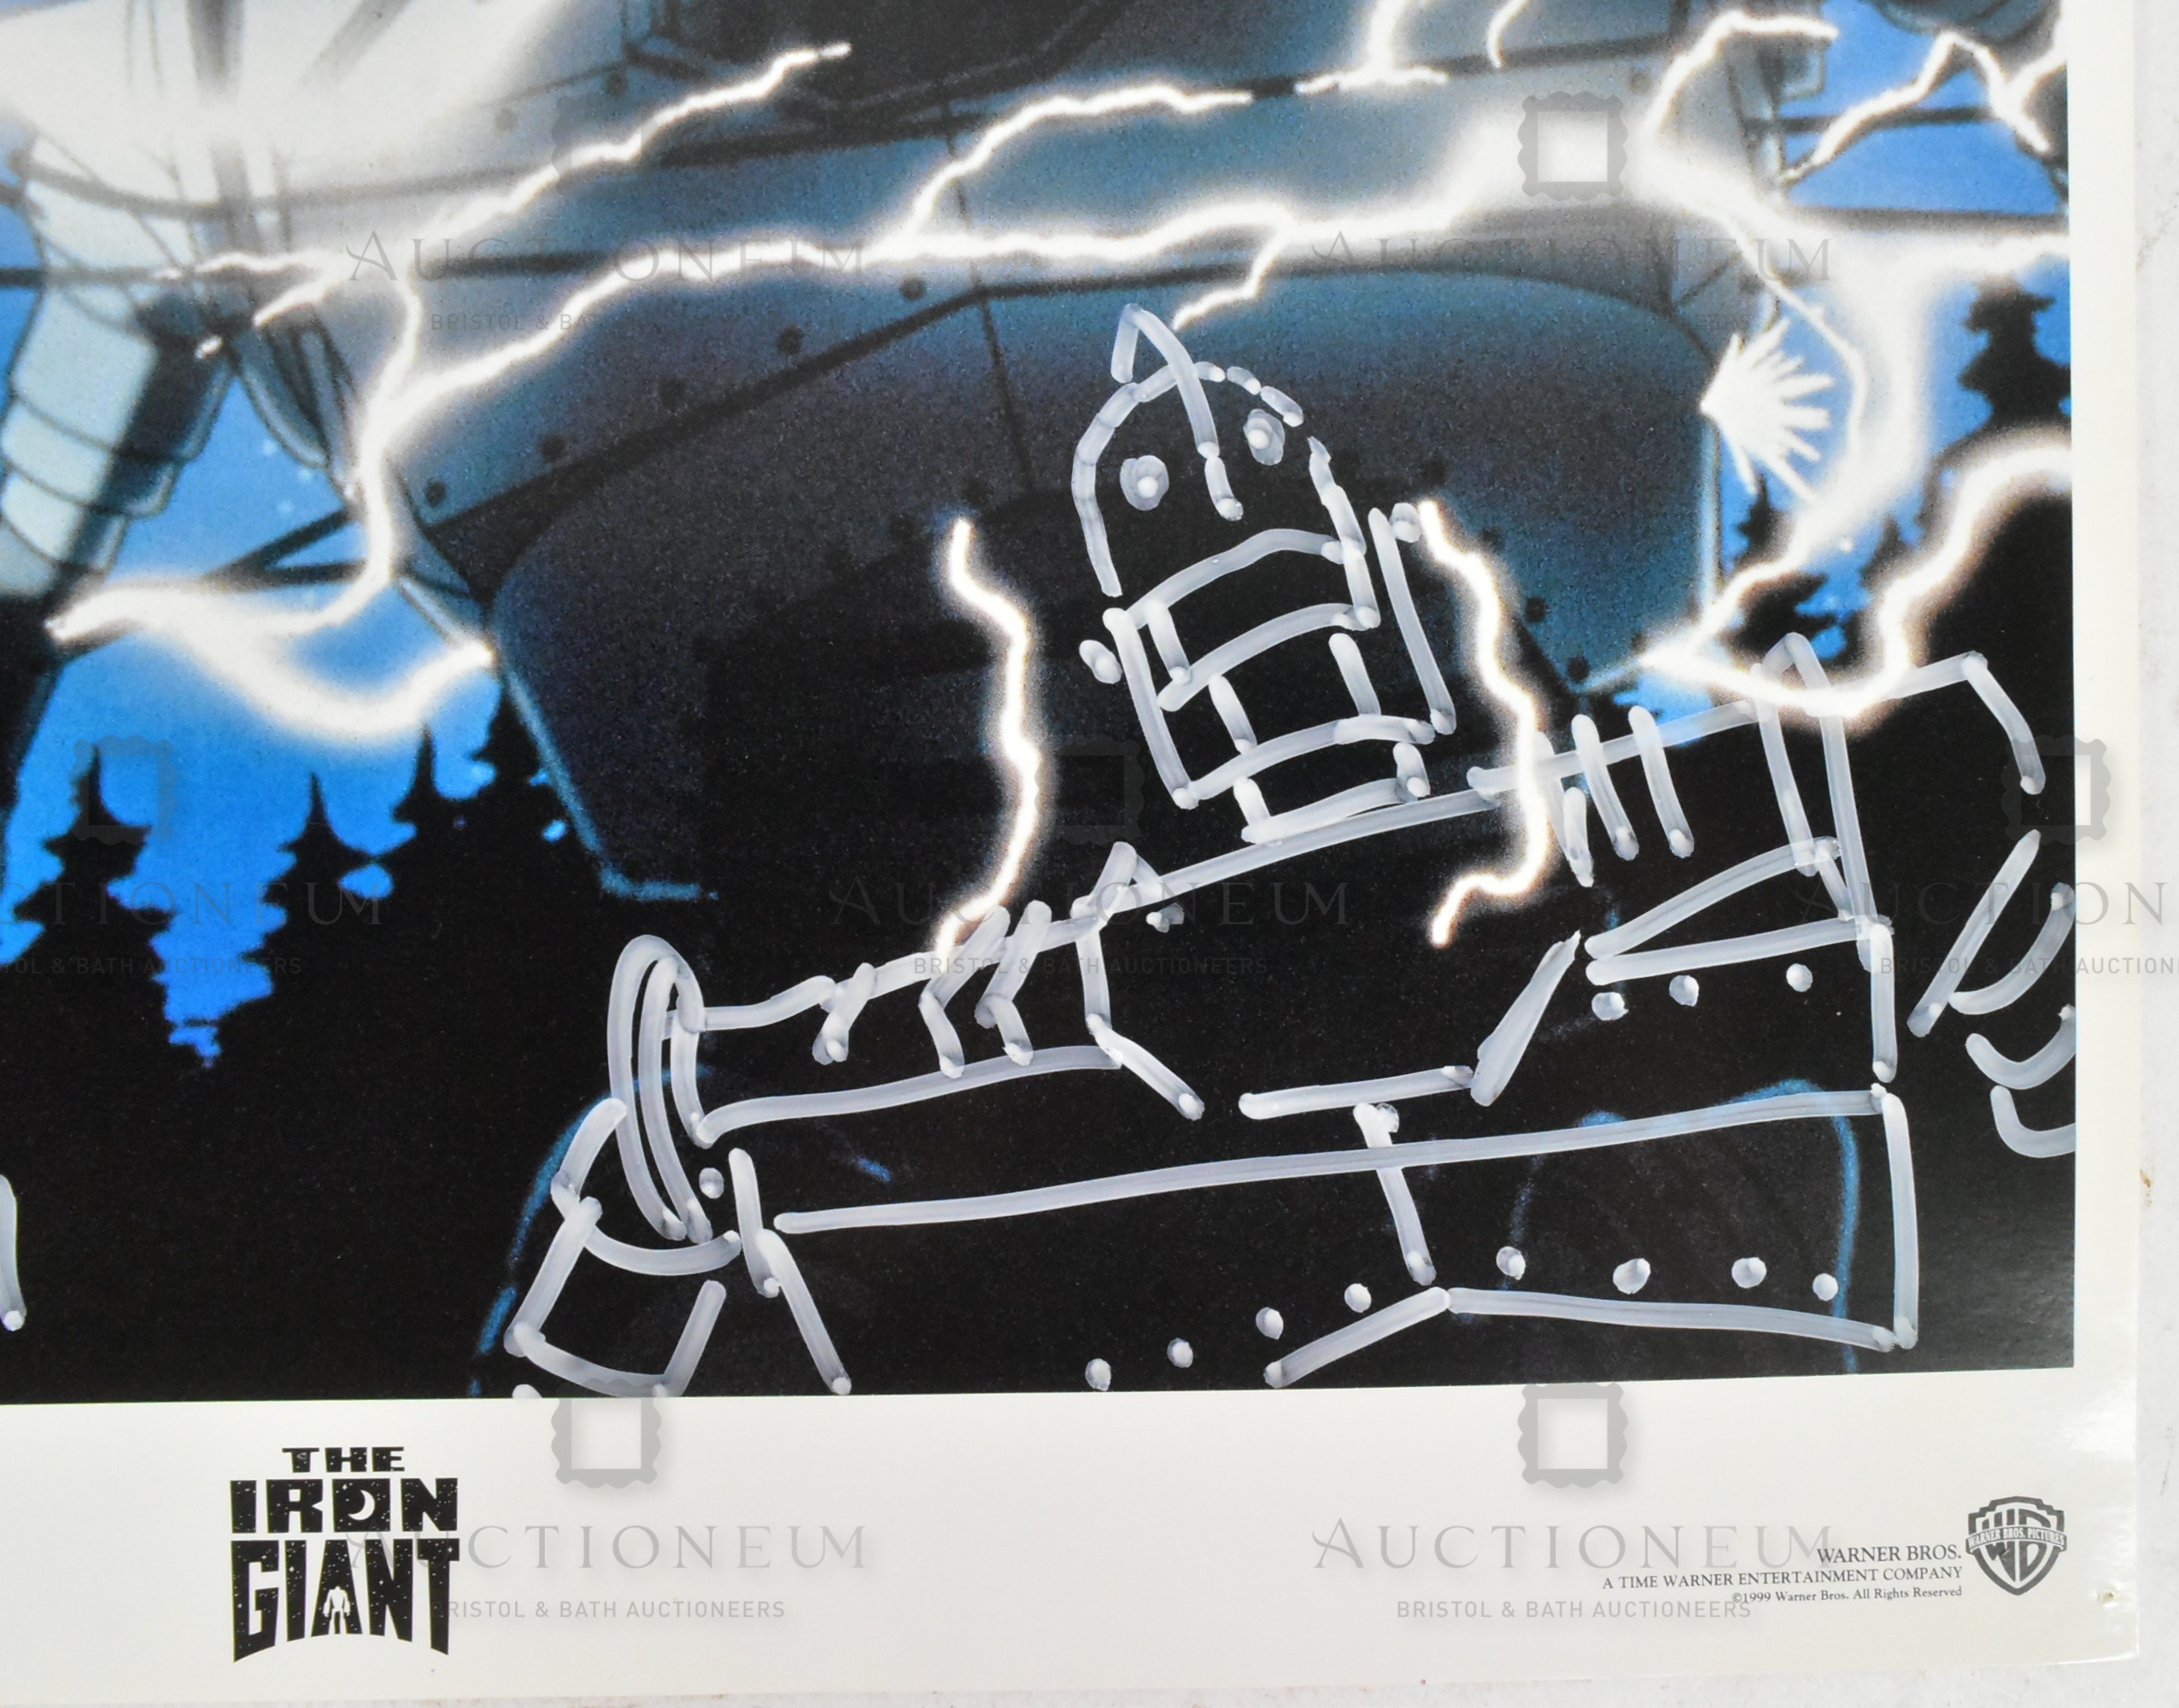 THE IRON GIANT - ORIGINAL SIGNED LOBBY CARD - Image 2 of 3